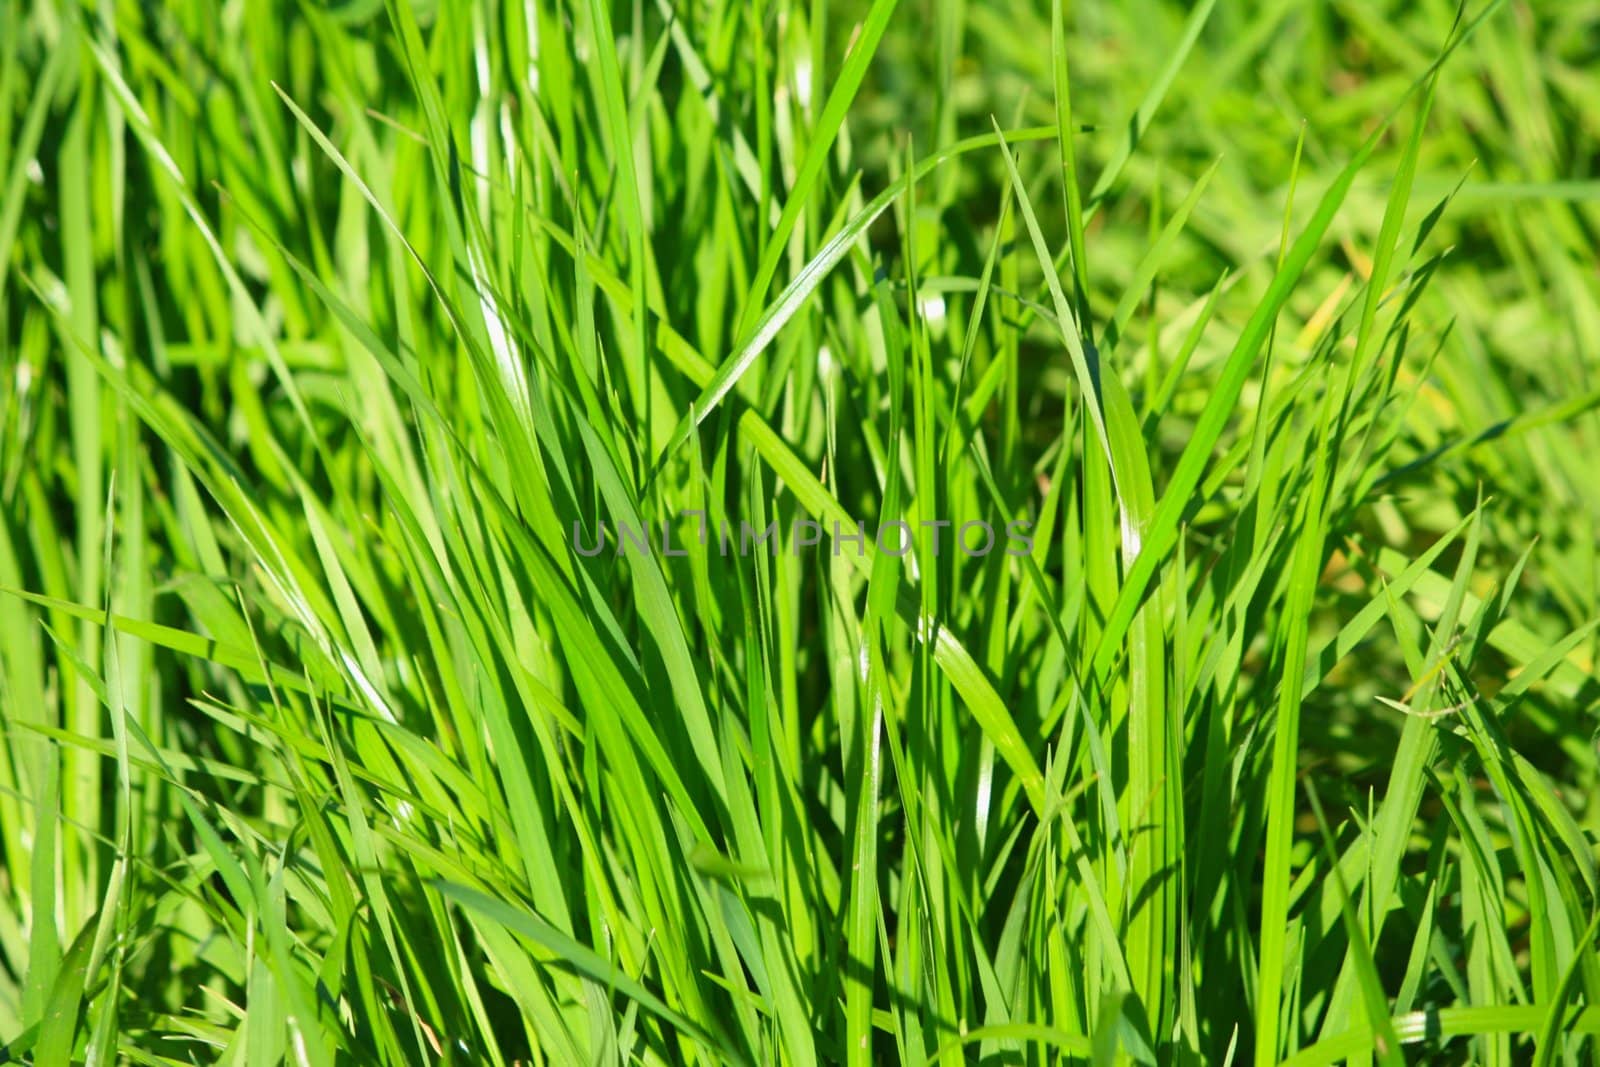 Large blades of green grass.